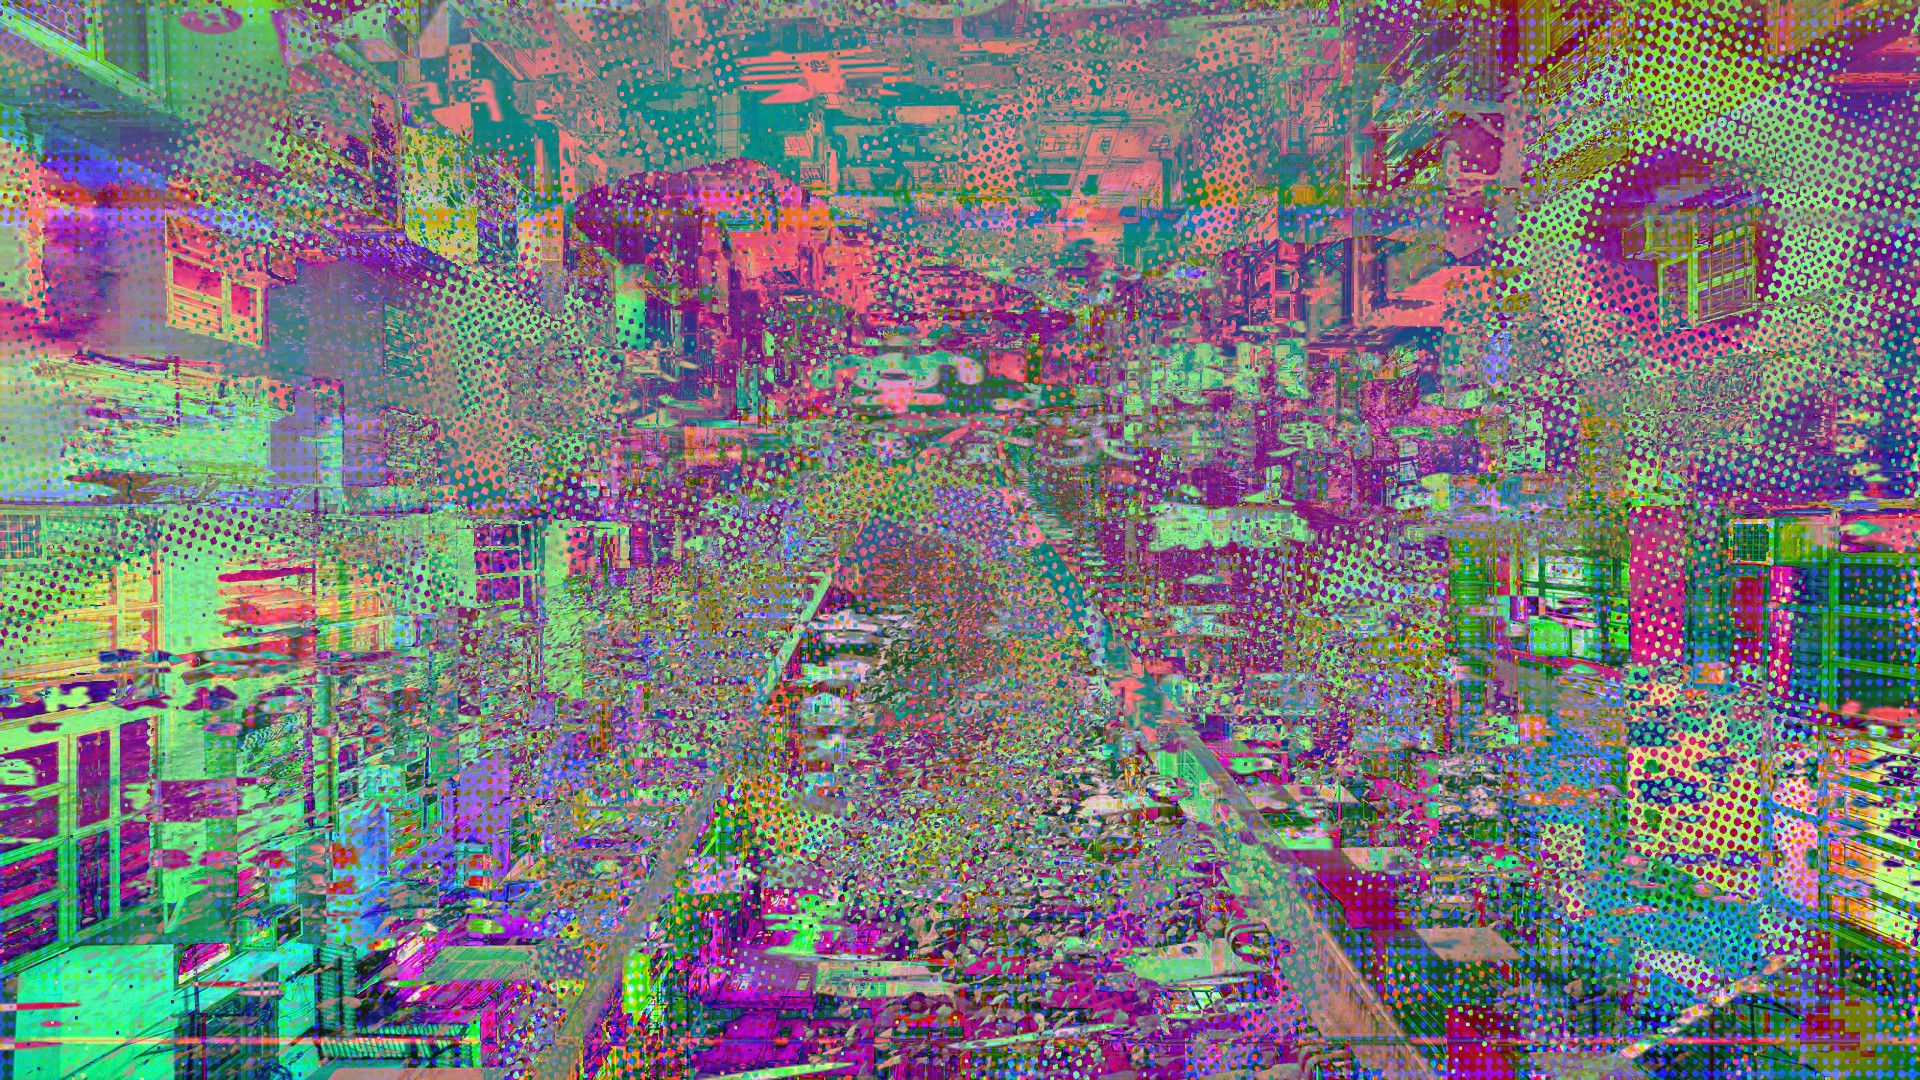 imageglitch for pc